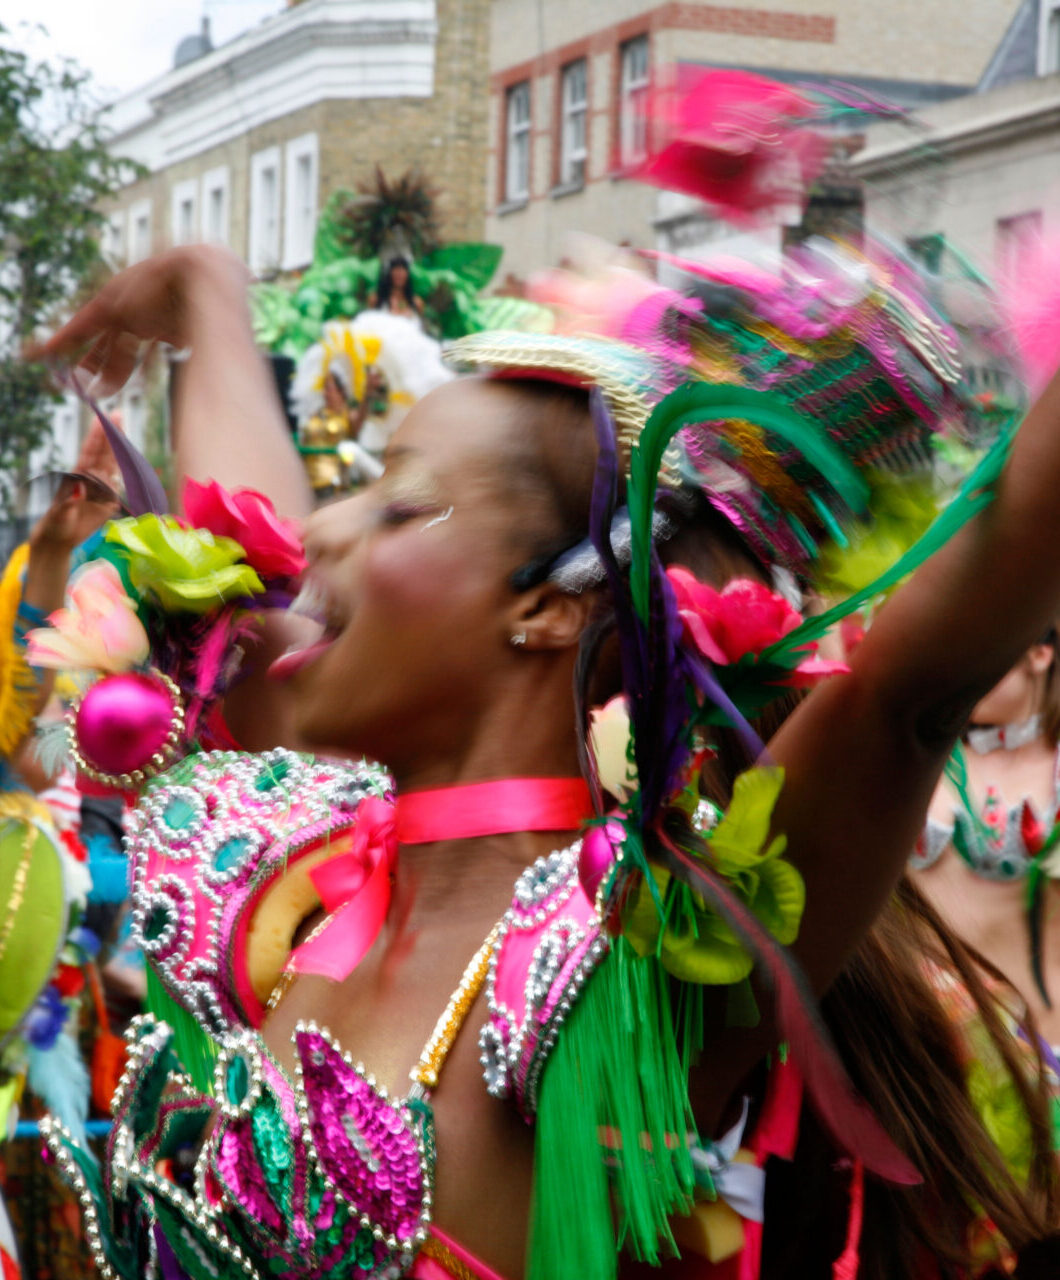 London's Caribbean community | A woman wearing a vibrant pink-and-green costume dancing in a parade at London's Notting Hill Carnival